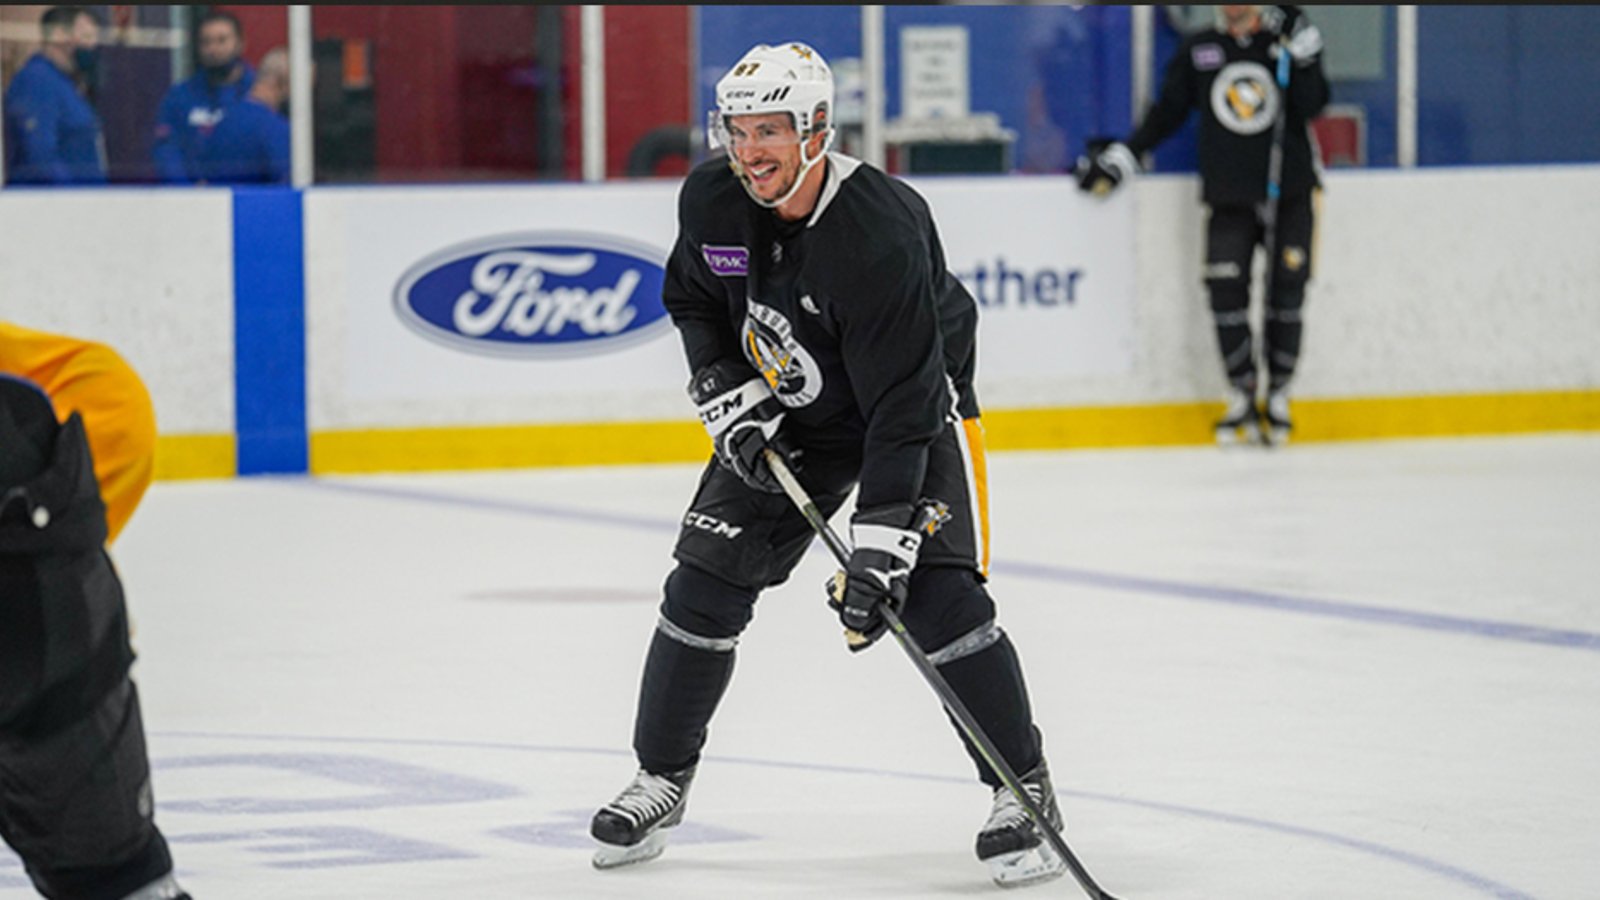 Injury concerns for Crosby as Penguins get ready to return to play